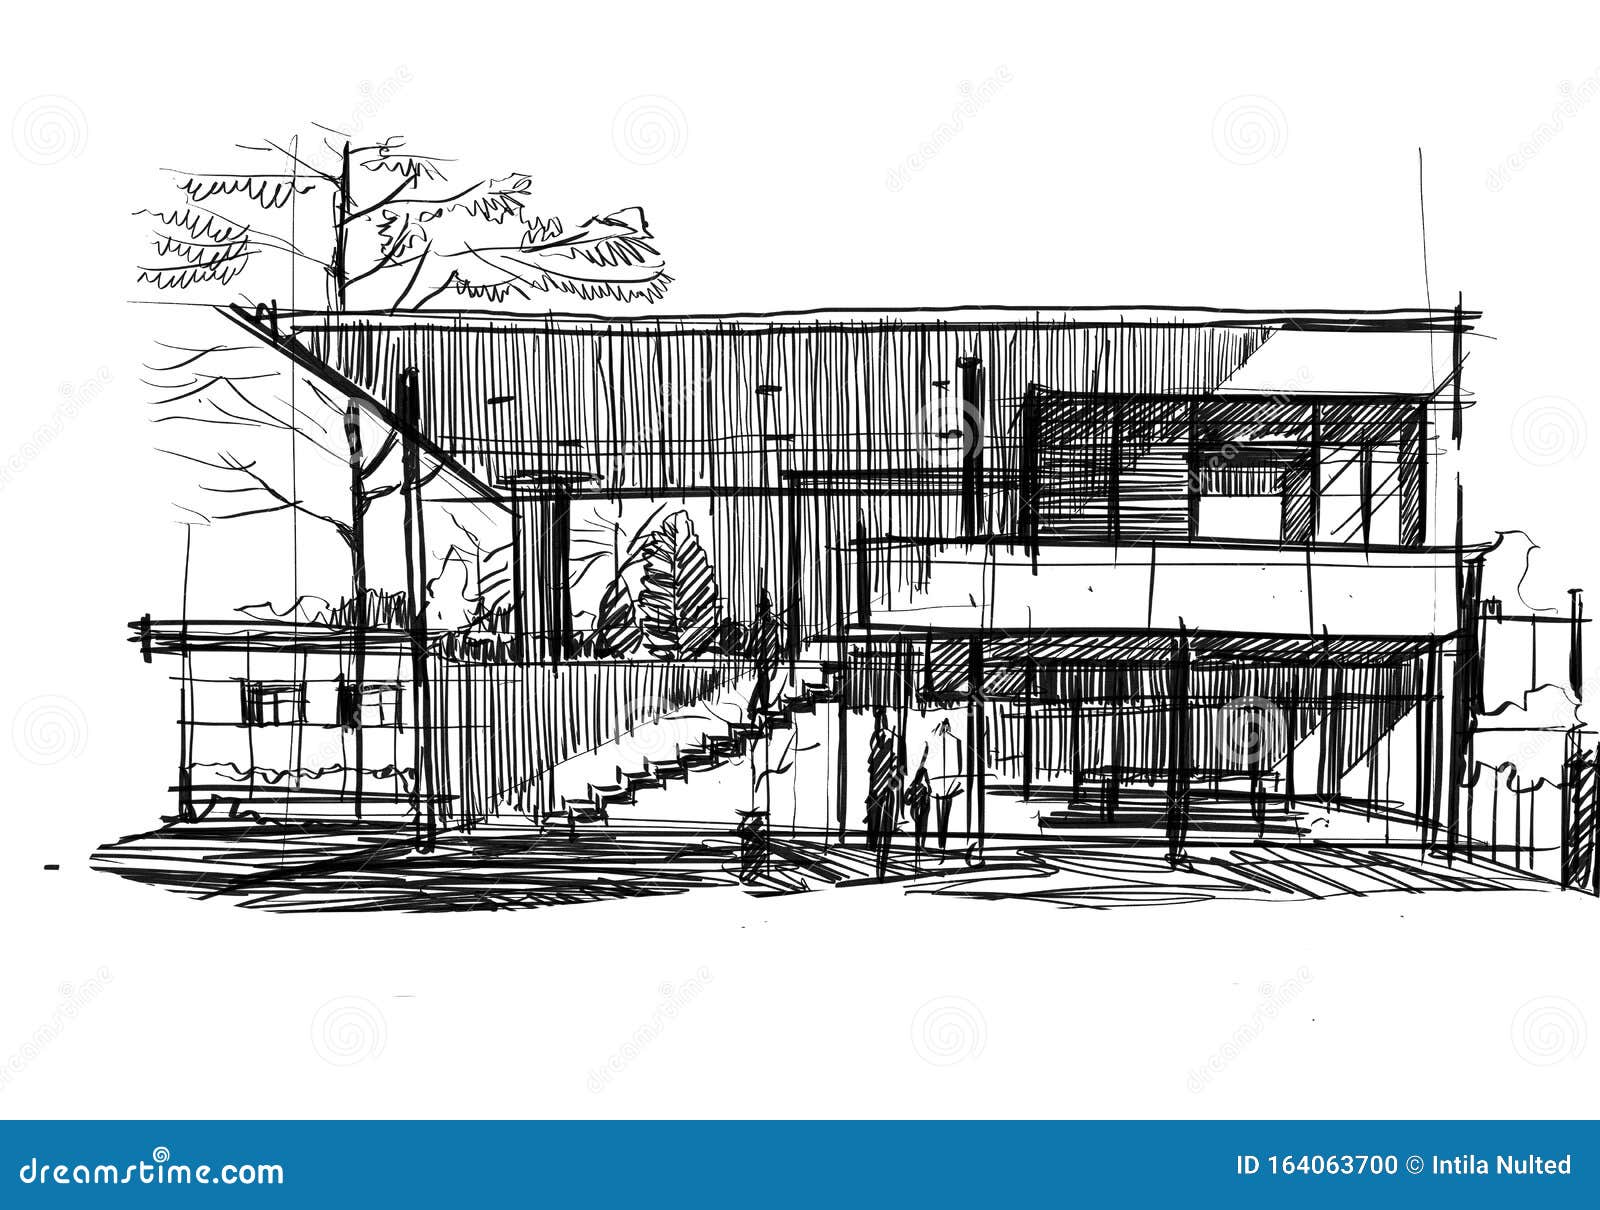 Creative Architecture Sketch Drawings 